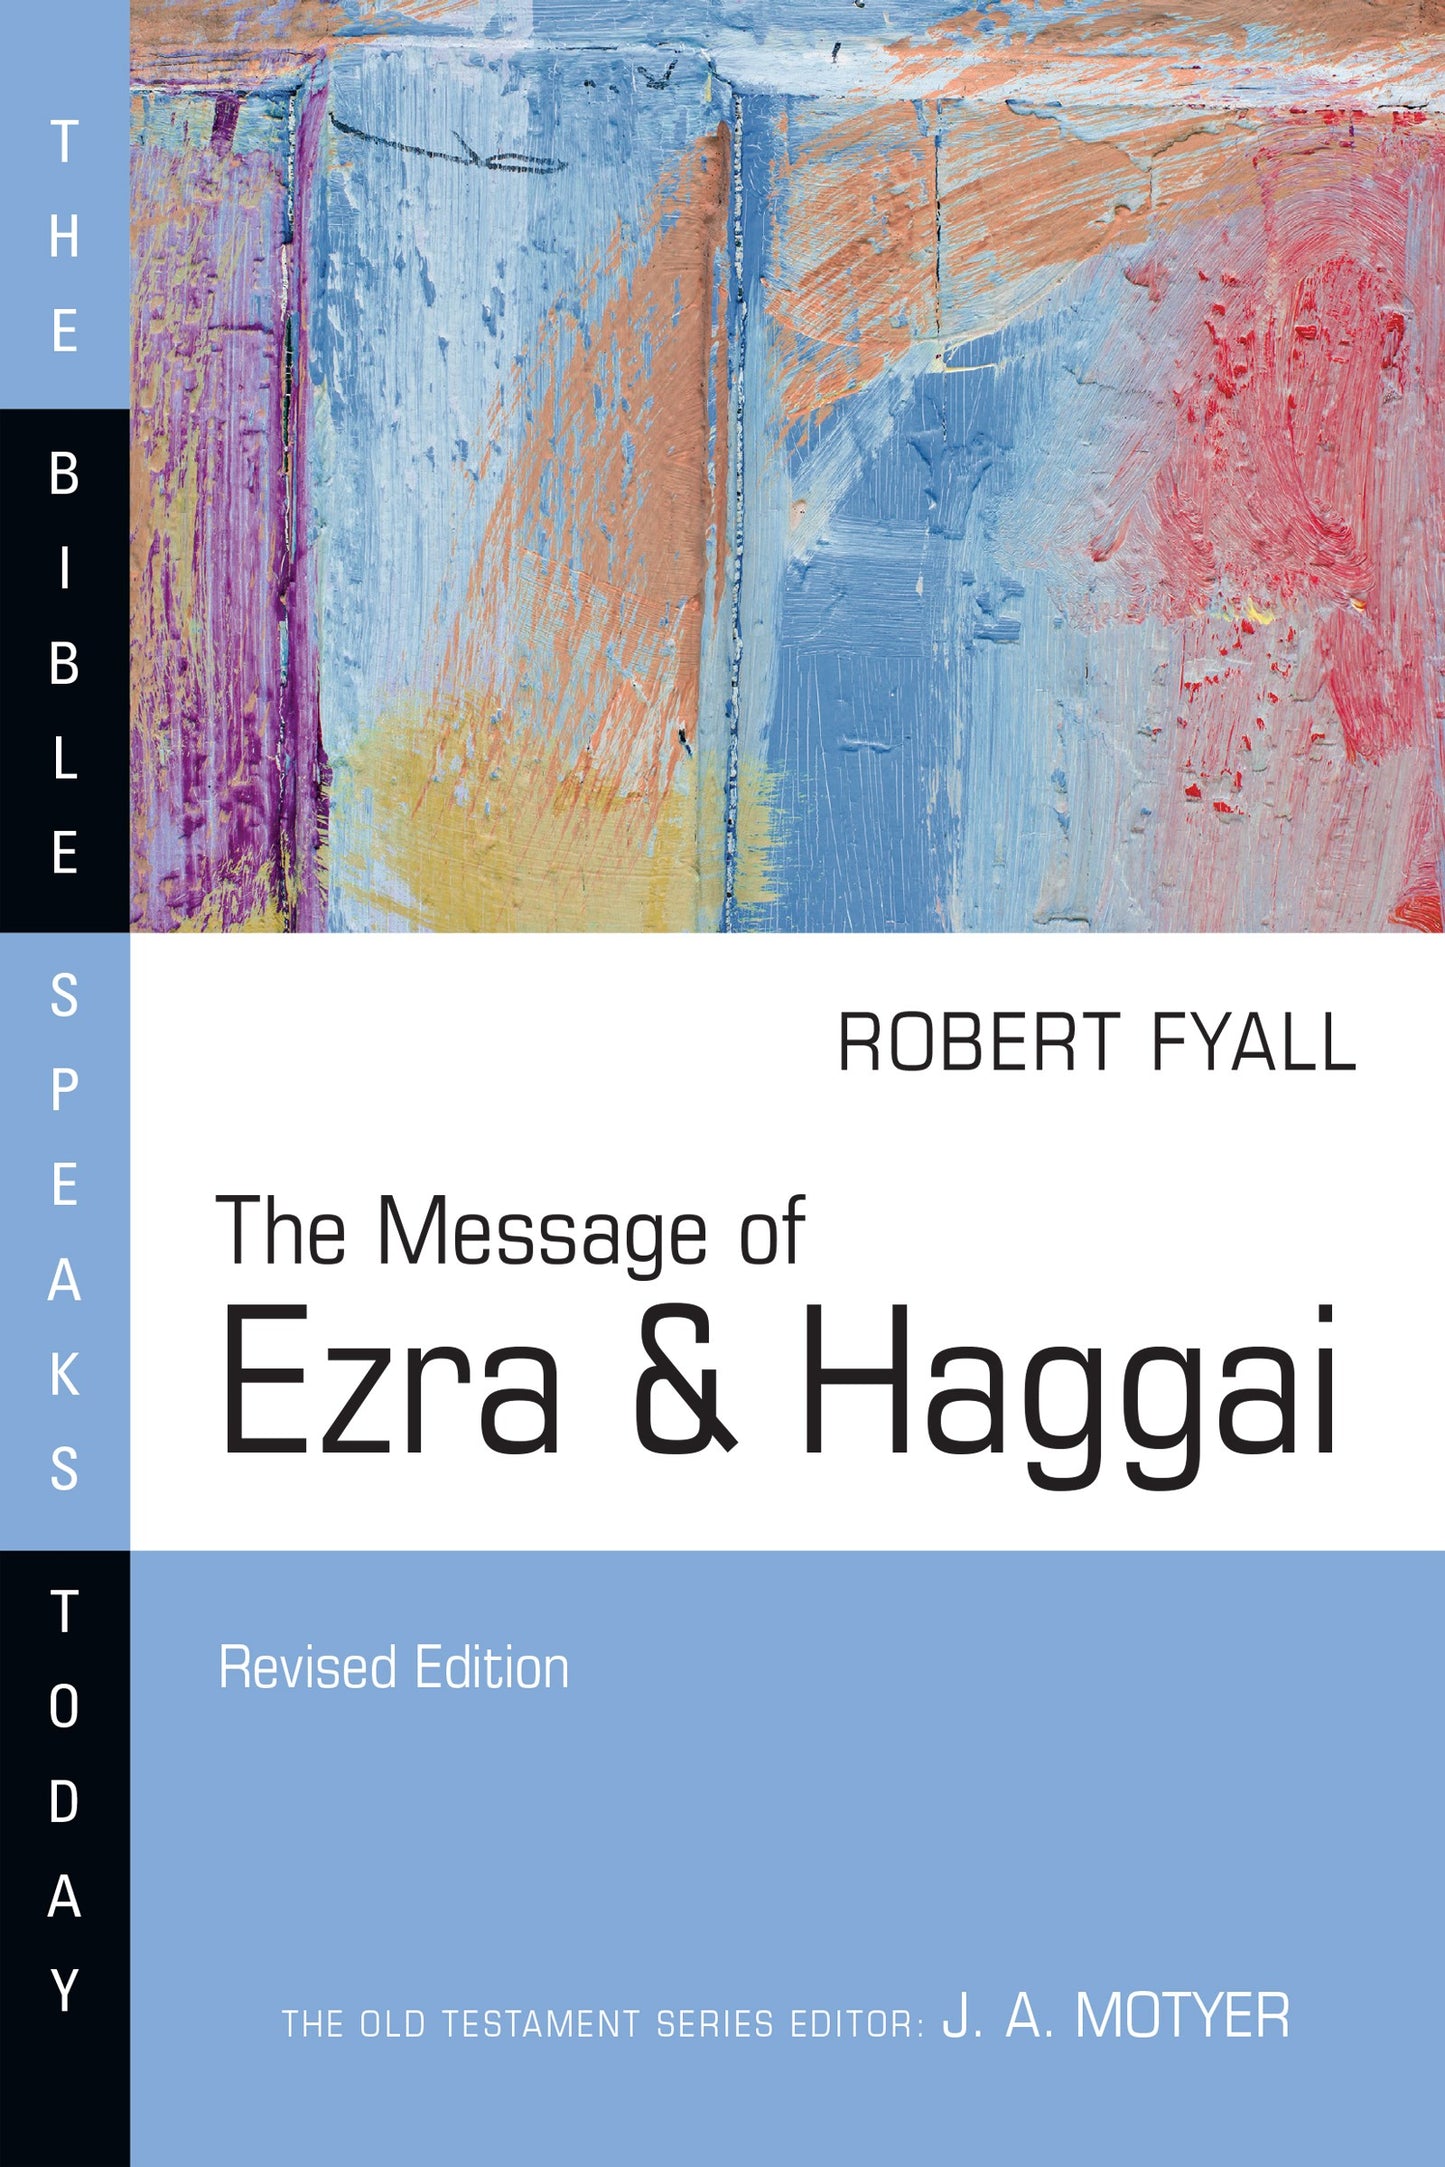 The Message Of Ezra & Haggai (The Bible Speaks Today) (Revised)